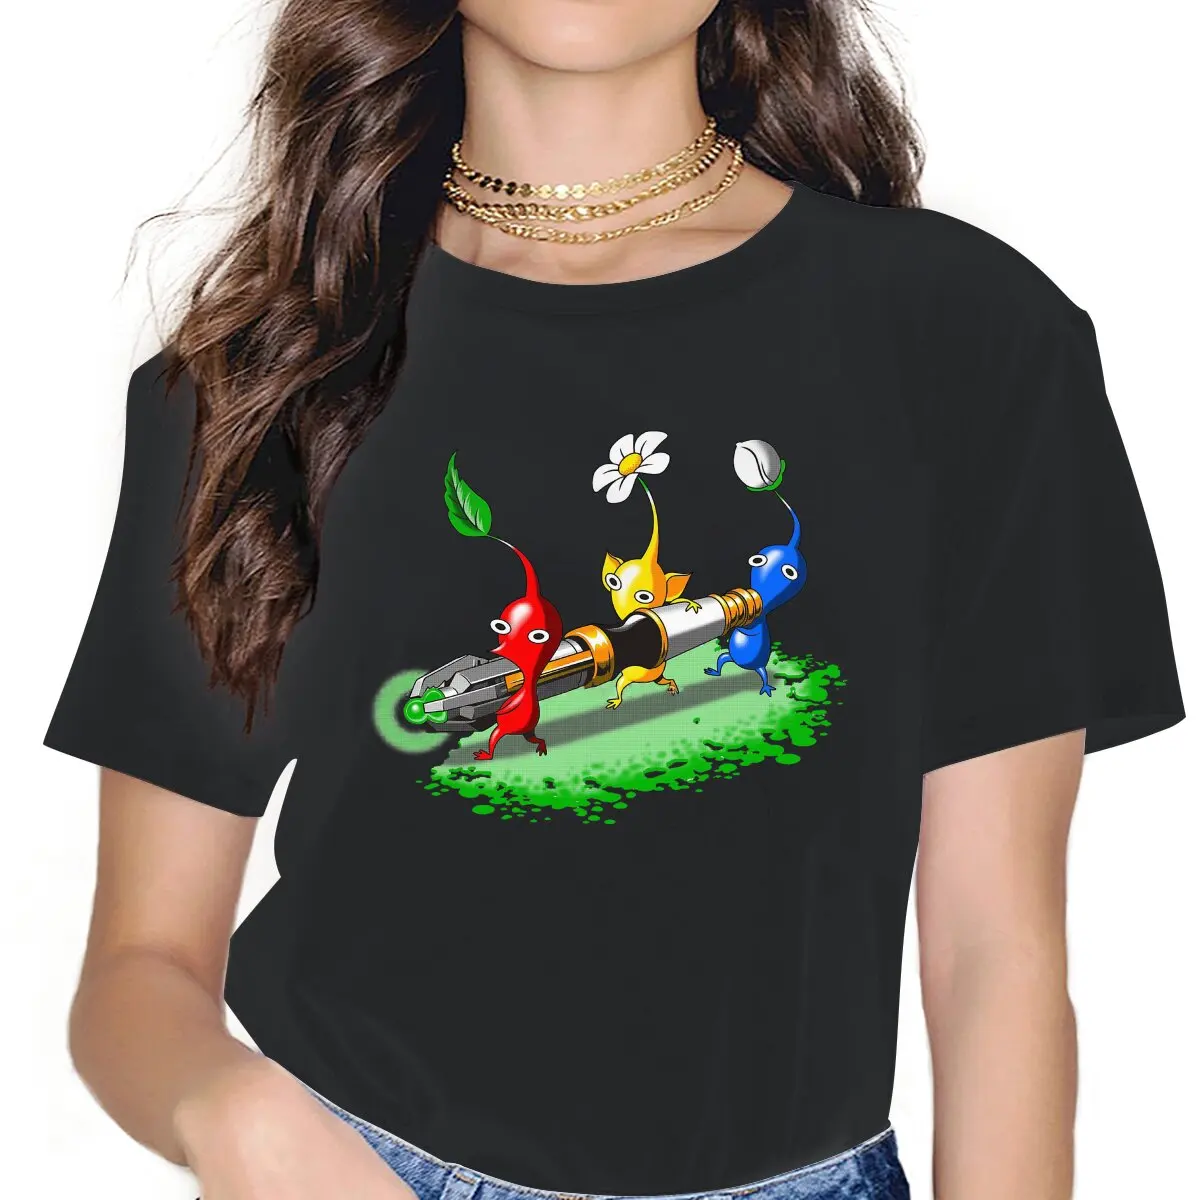 

Fun Who T-Shirt for Women O Neck T Shirts Pikmin Puzzle Game Short Sleeve Tee Shirt Gift Idea Clothing